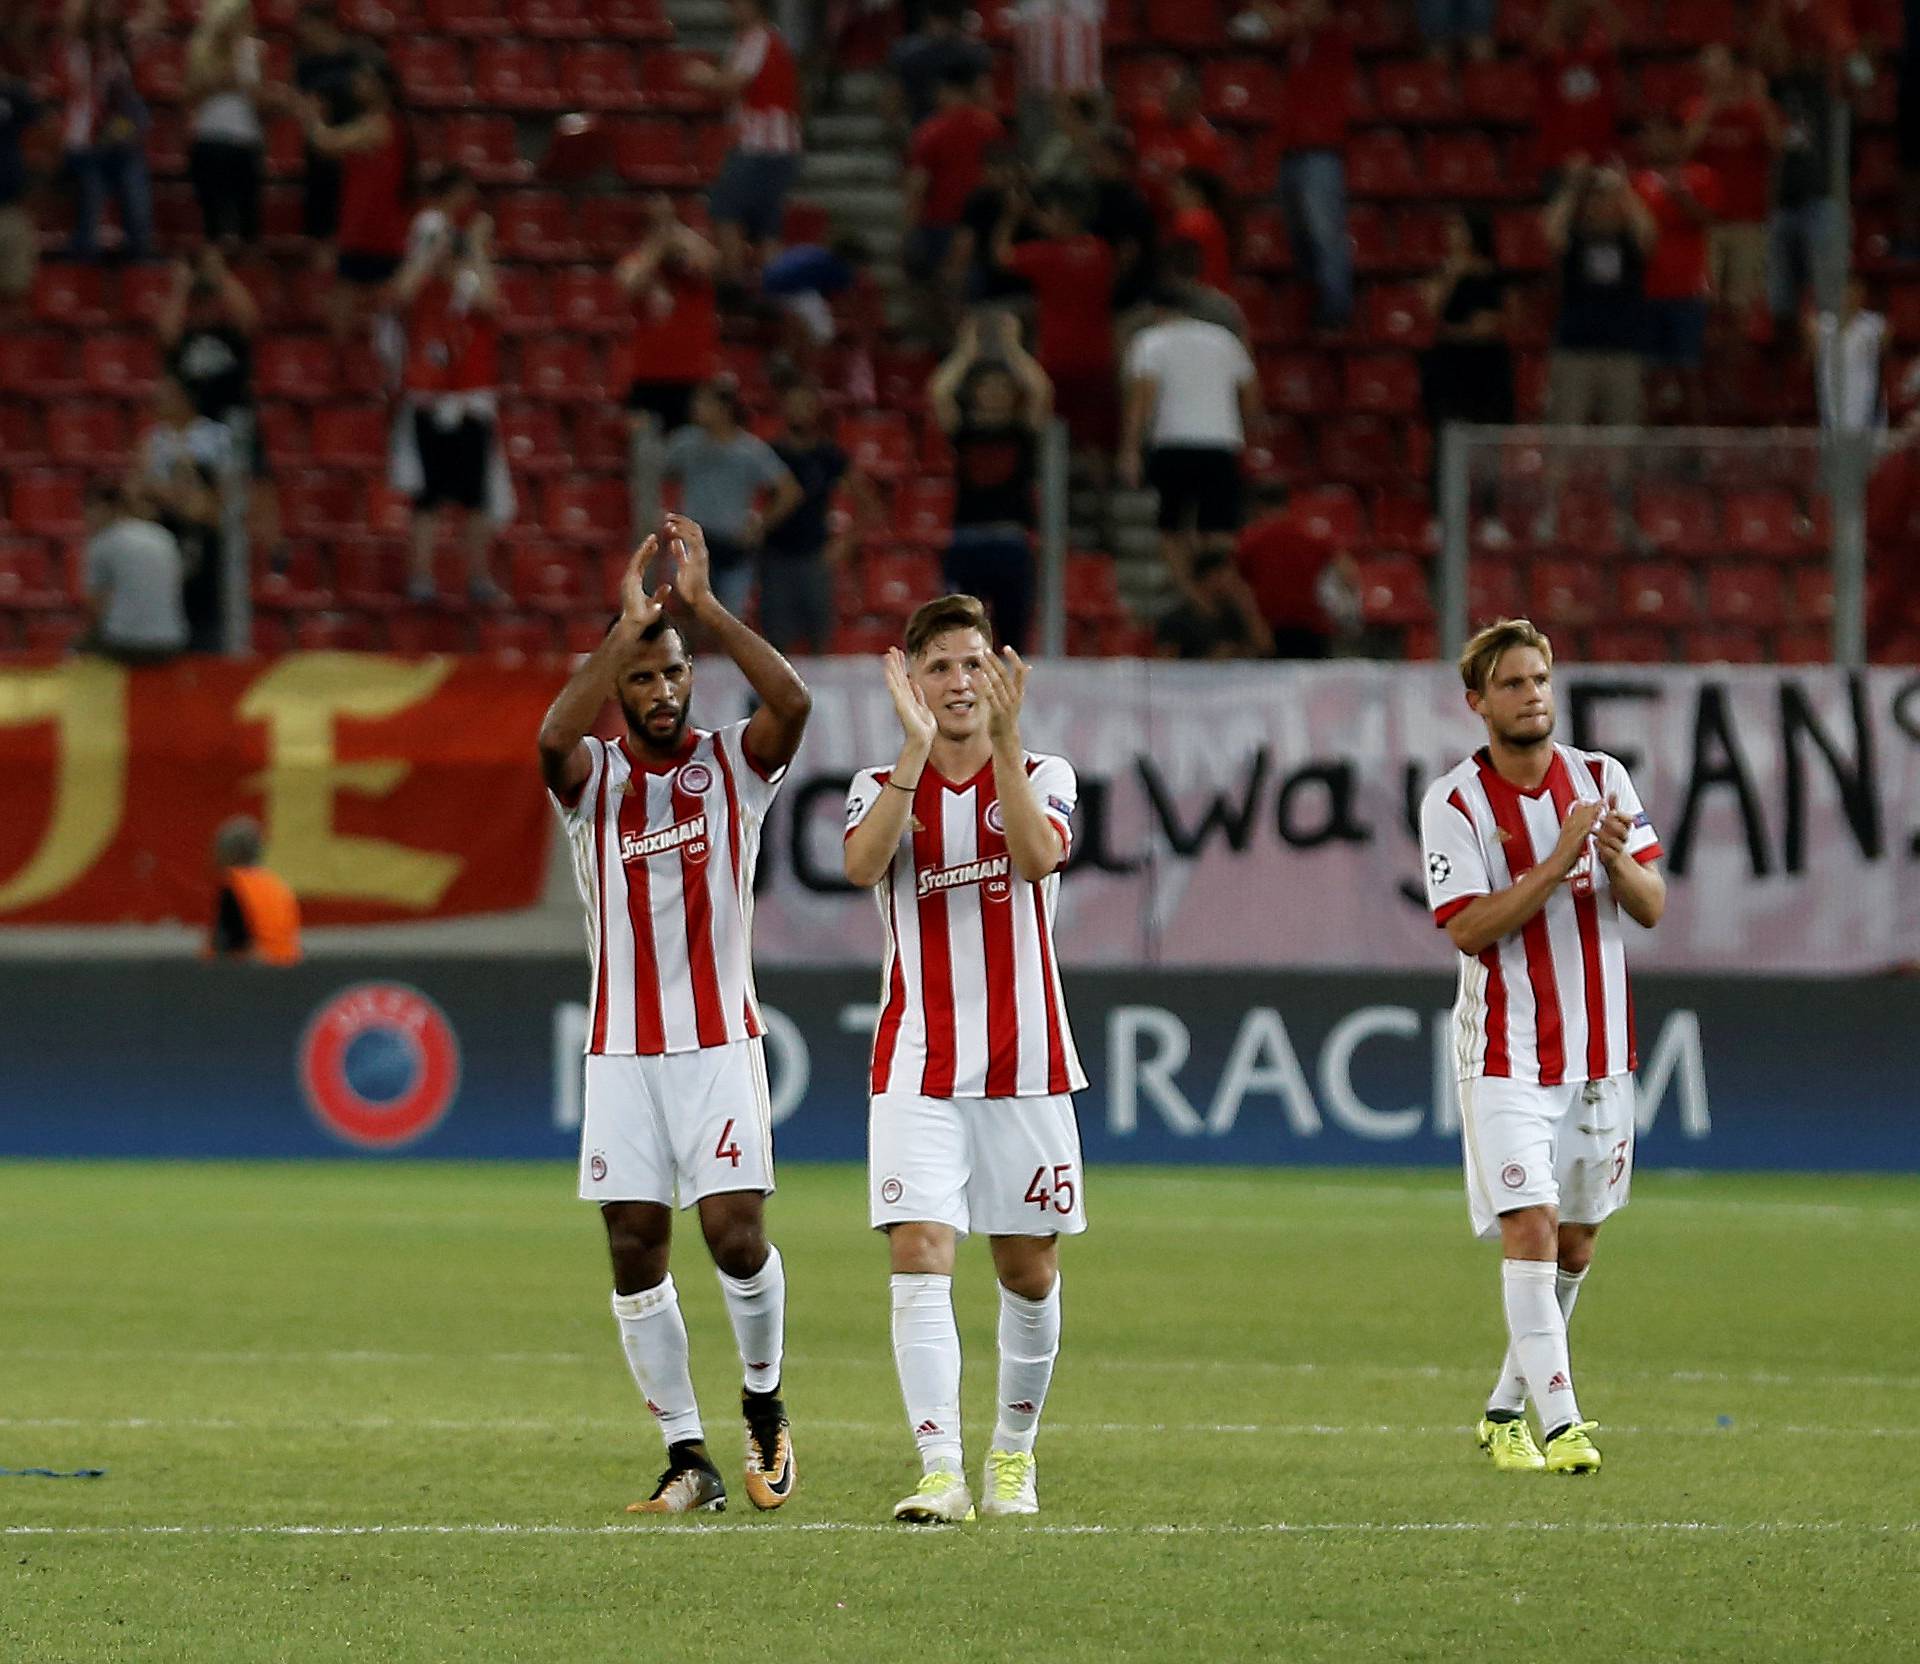 Champions League - Olympiacos vs HNK Rijeka - Qualifying Play-Off First Leg